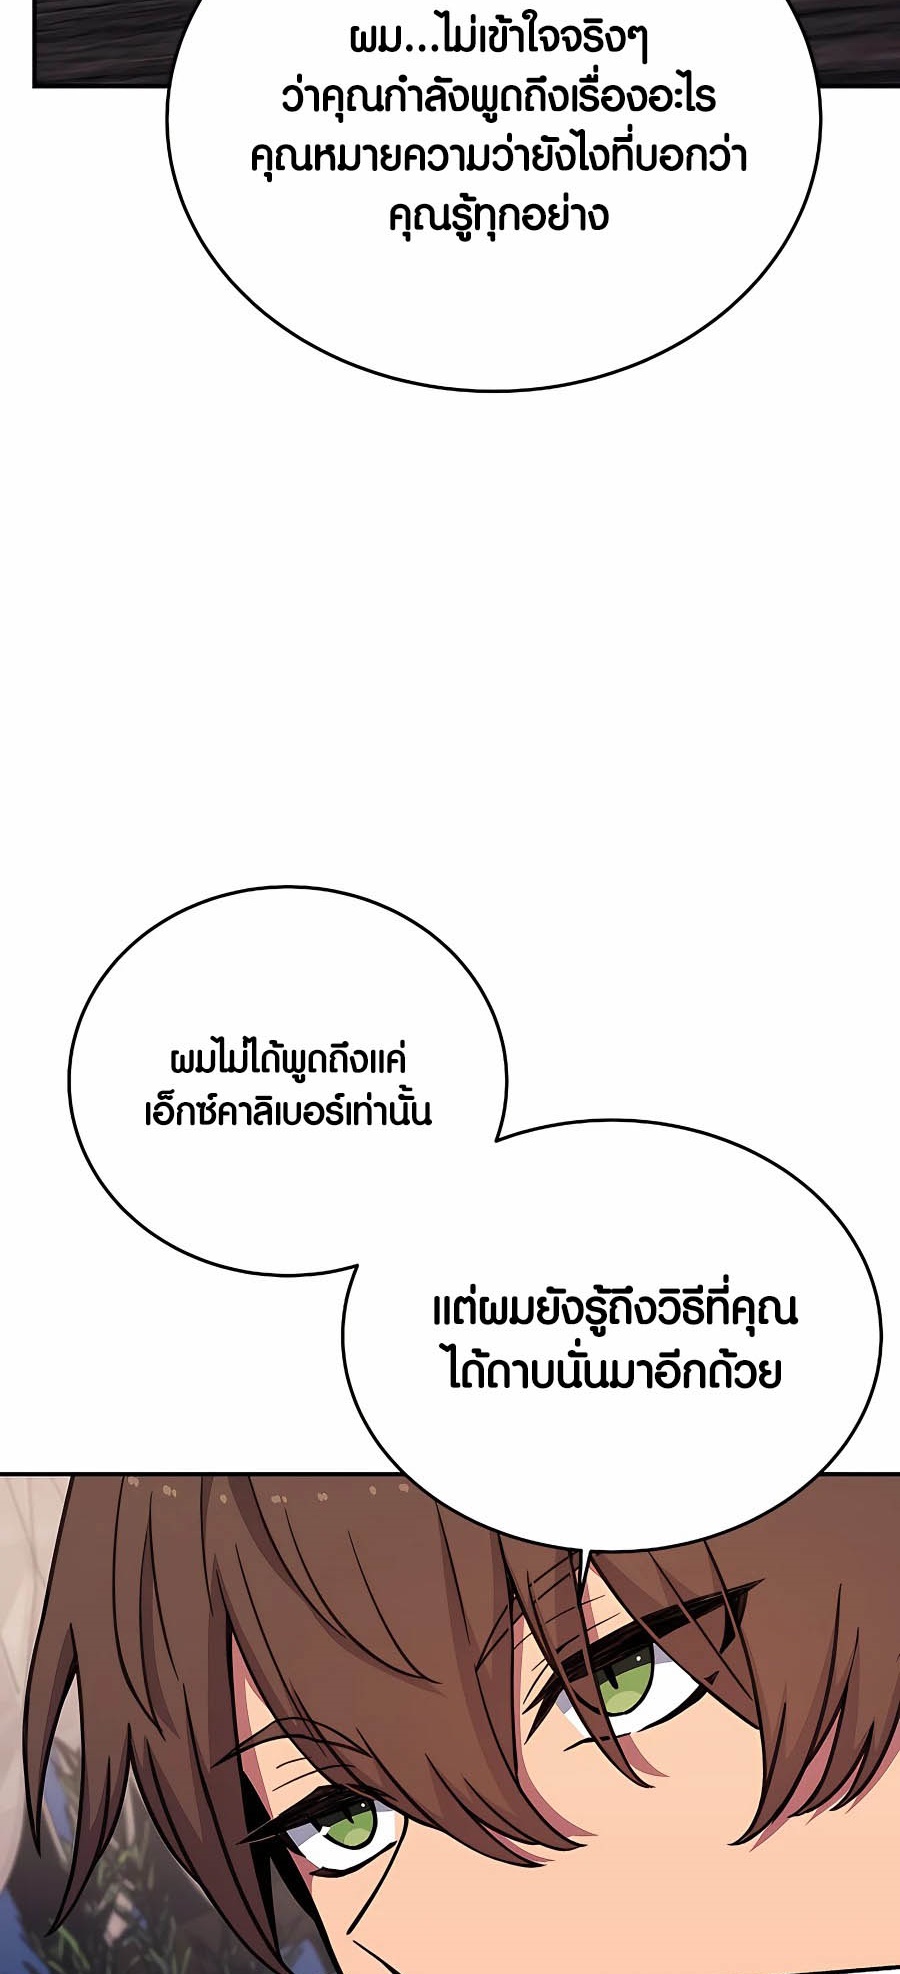 à¸­à¹ˆà¸²à¸™à¸¡à¸±à¸™à¸®à¸§à¸² à¹€à¸£à¸·à¹ˆà¸­à¸‡ The Part Time Land of the Gods 56 34